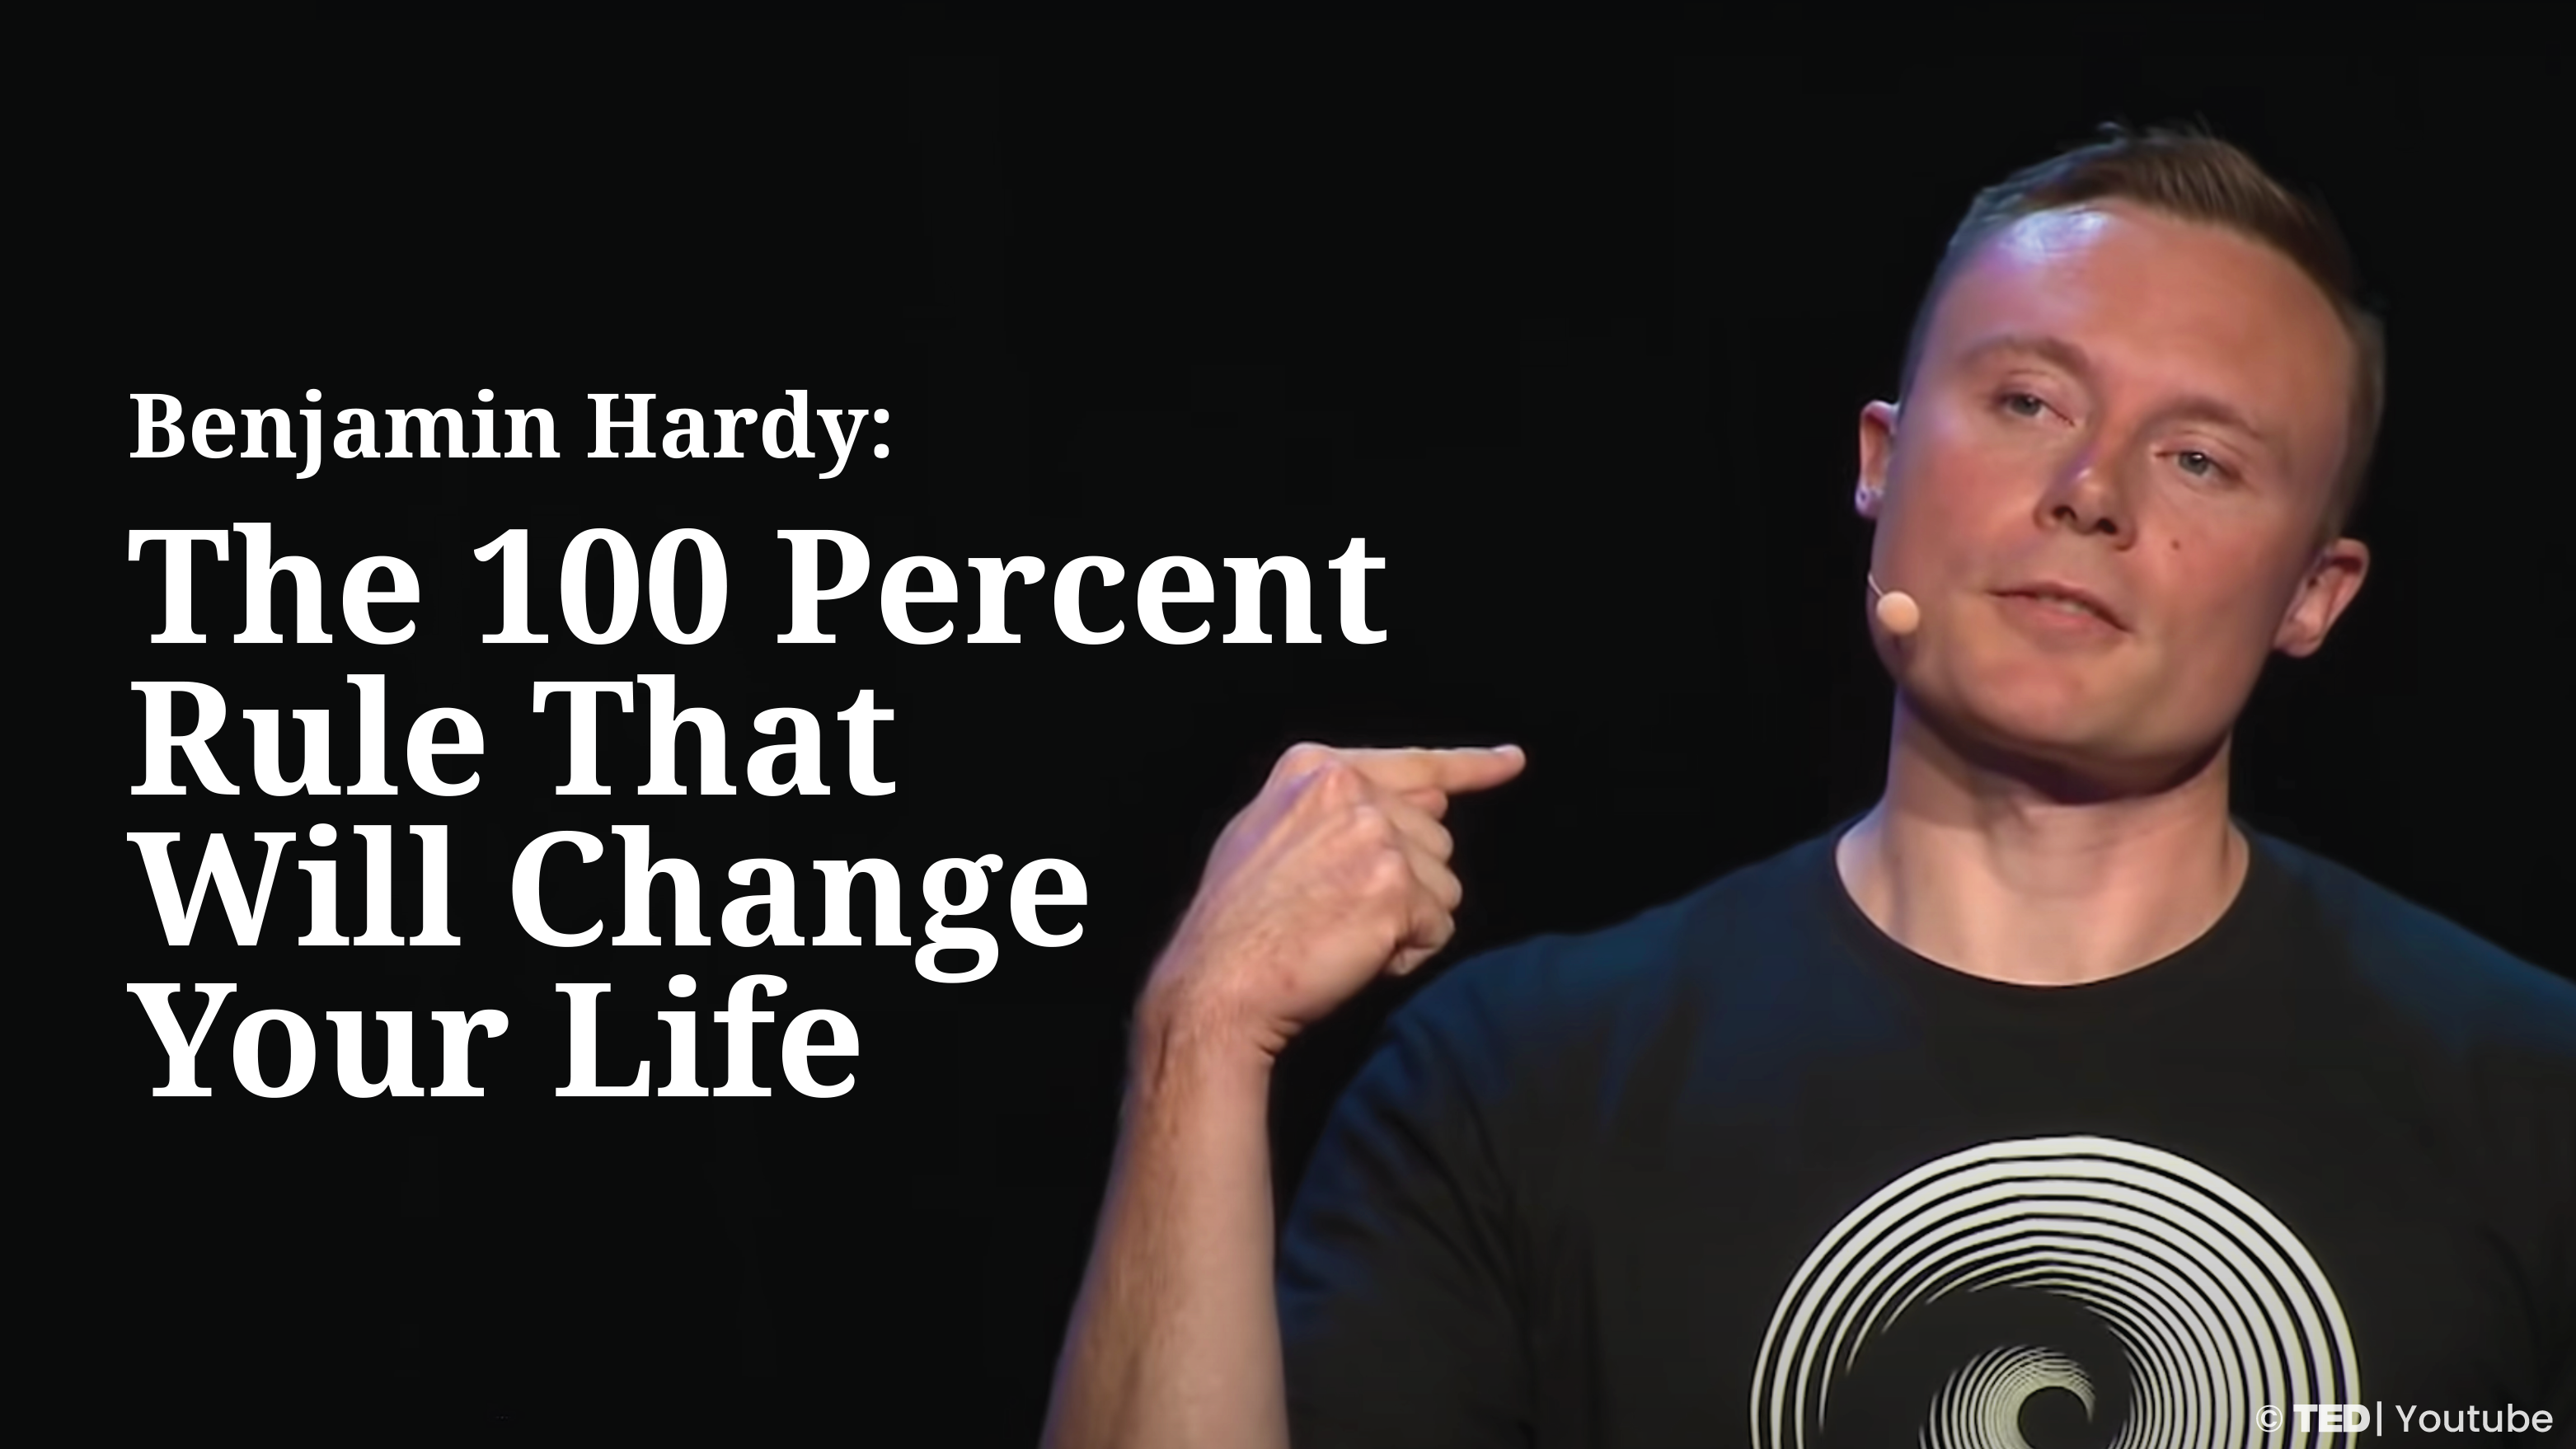 [A+] Benjamin Hardy:The 100 Percent Rule That Will Change Your Life [PRACTICE]